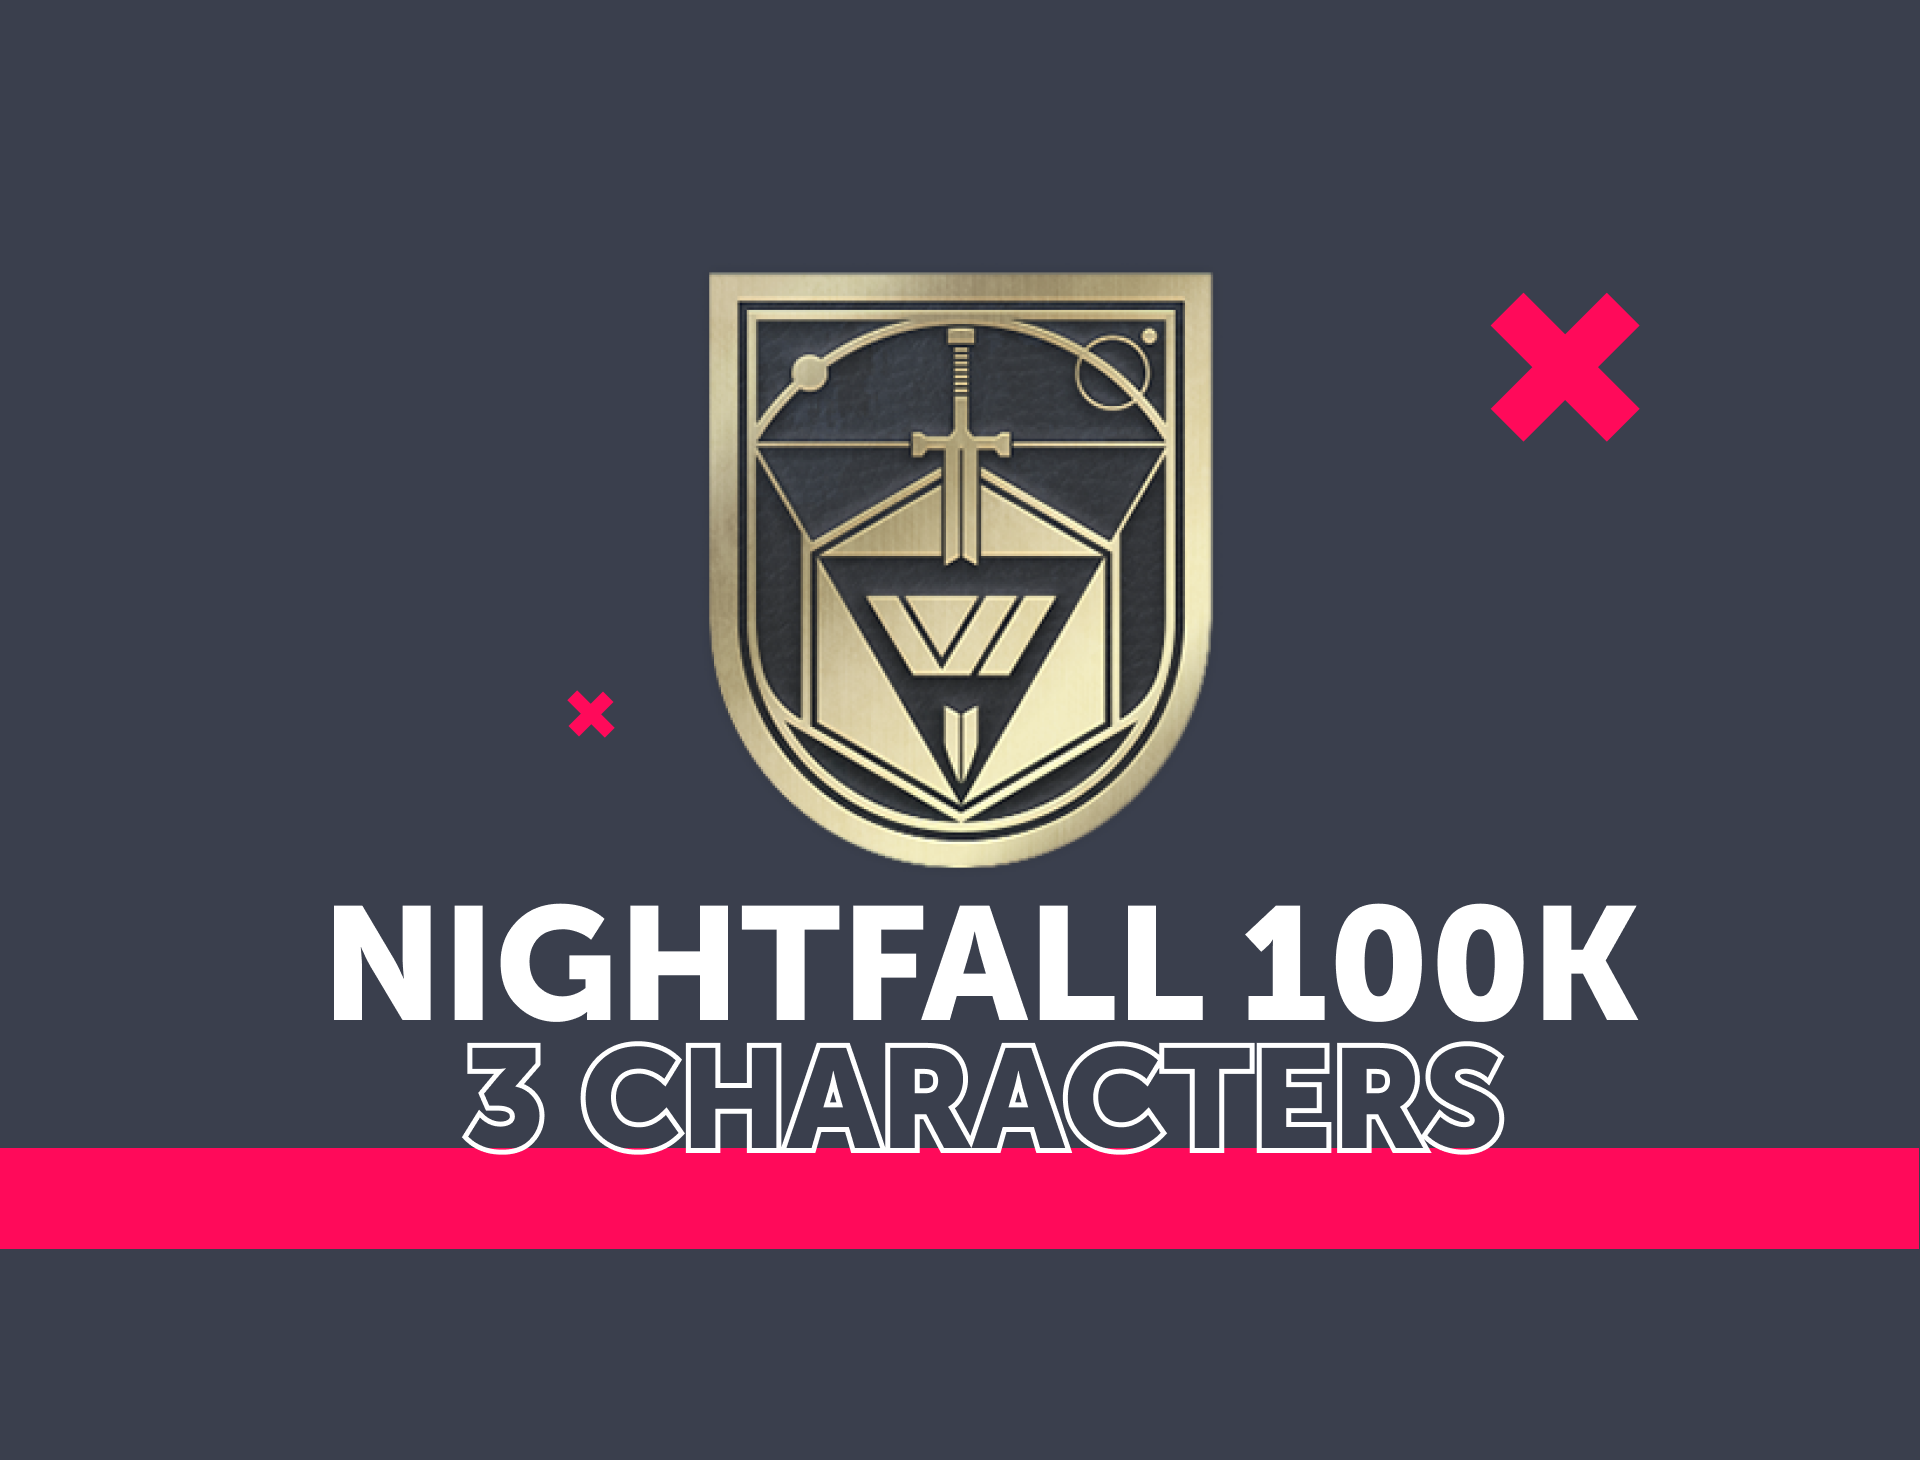 Nightfall: The Ordeal 200k Challenge for 3 Guardians